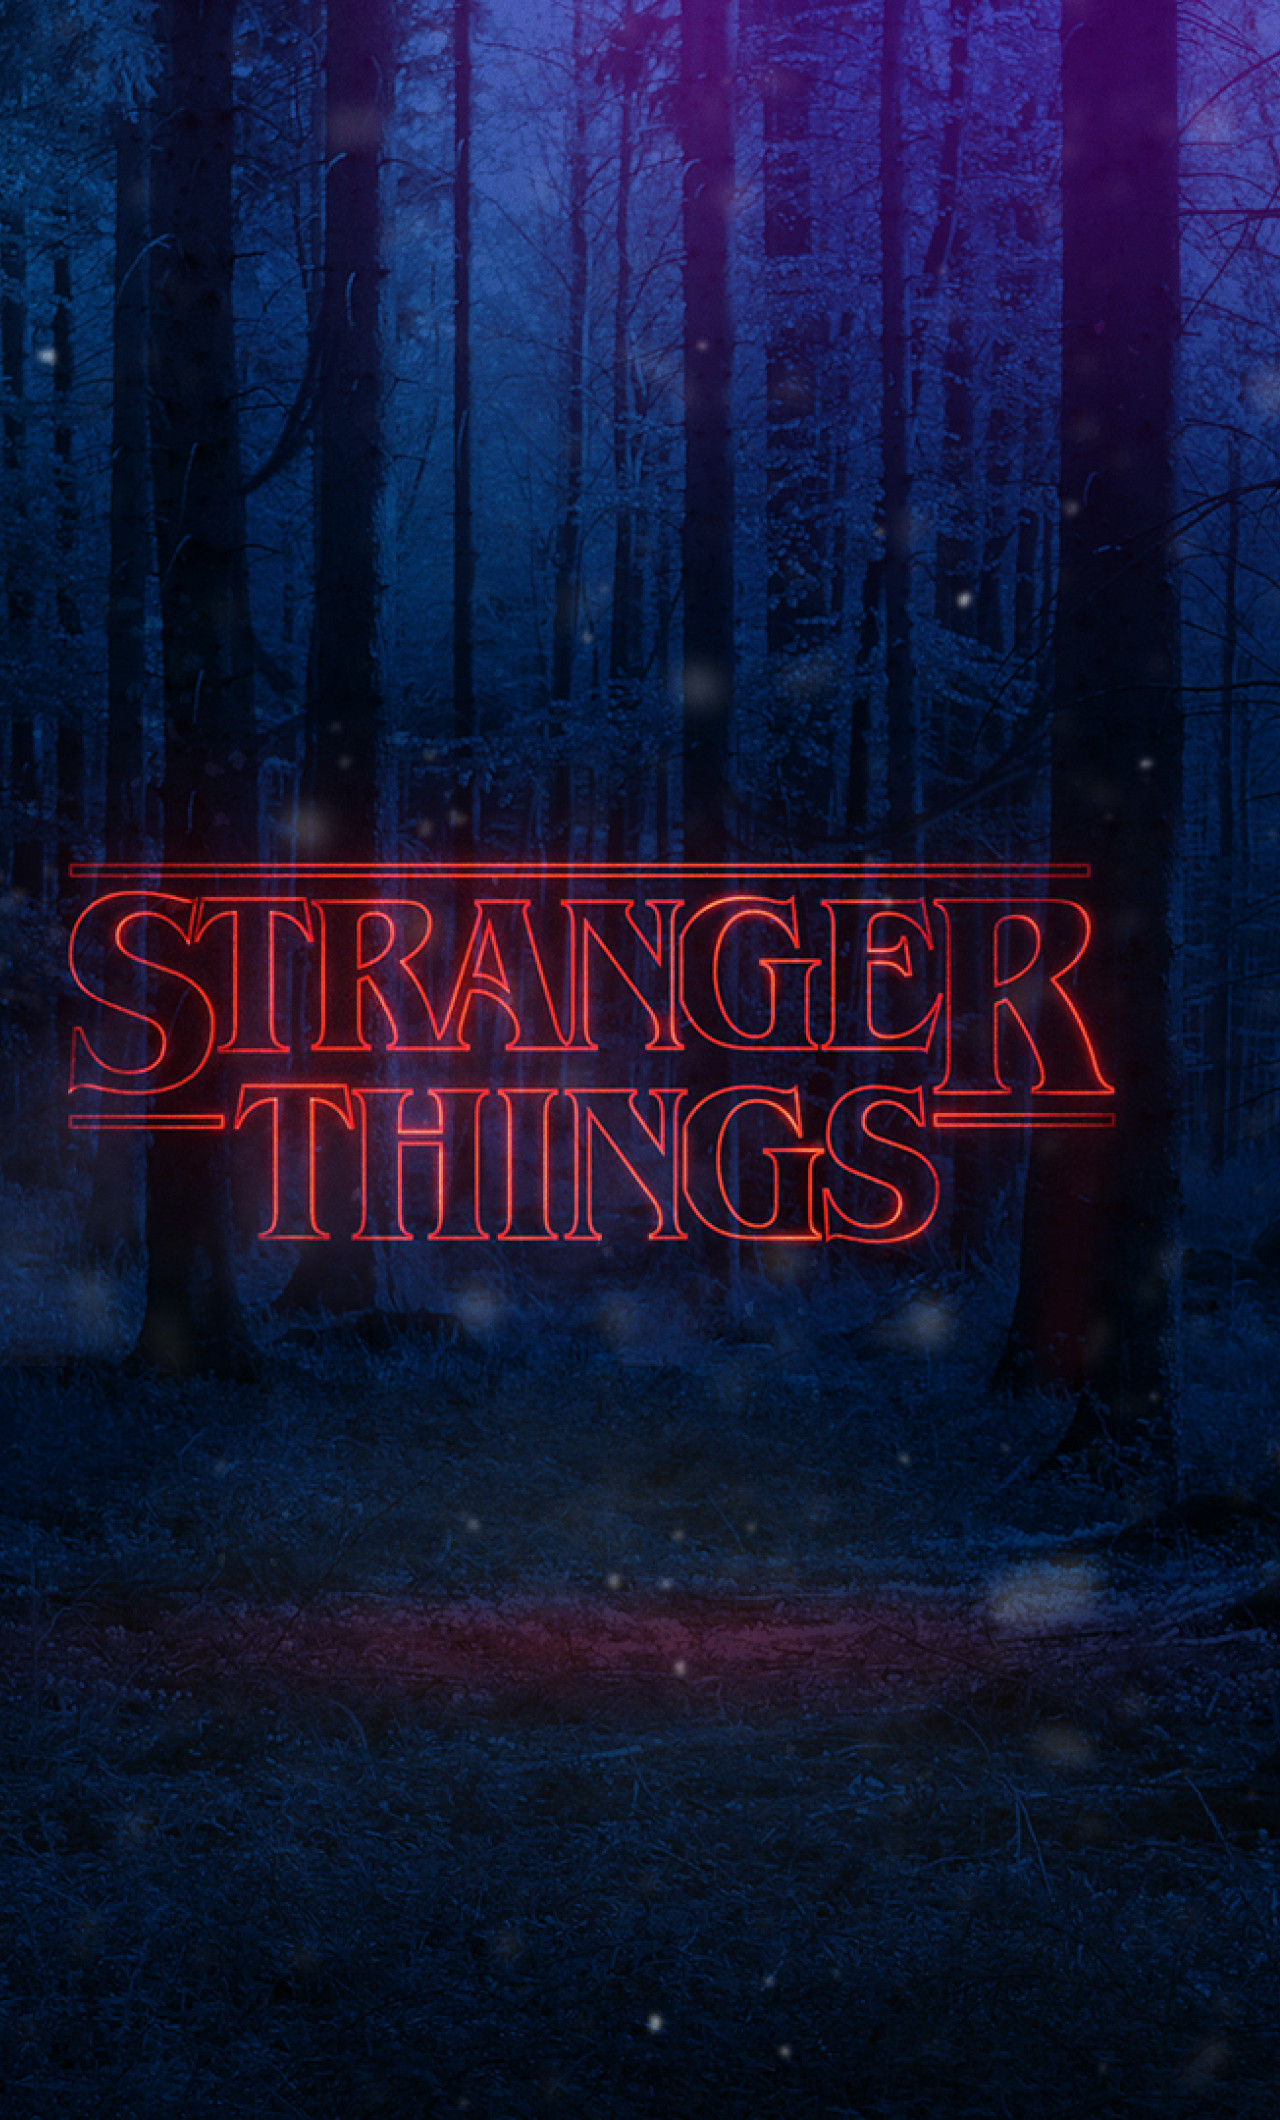 stranger things phone wallpaper,text,font,sky,darkness,electric blue